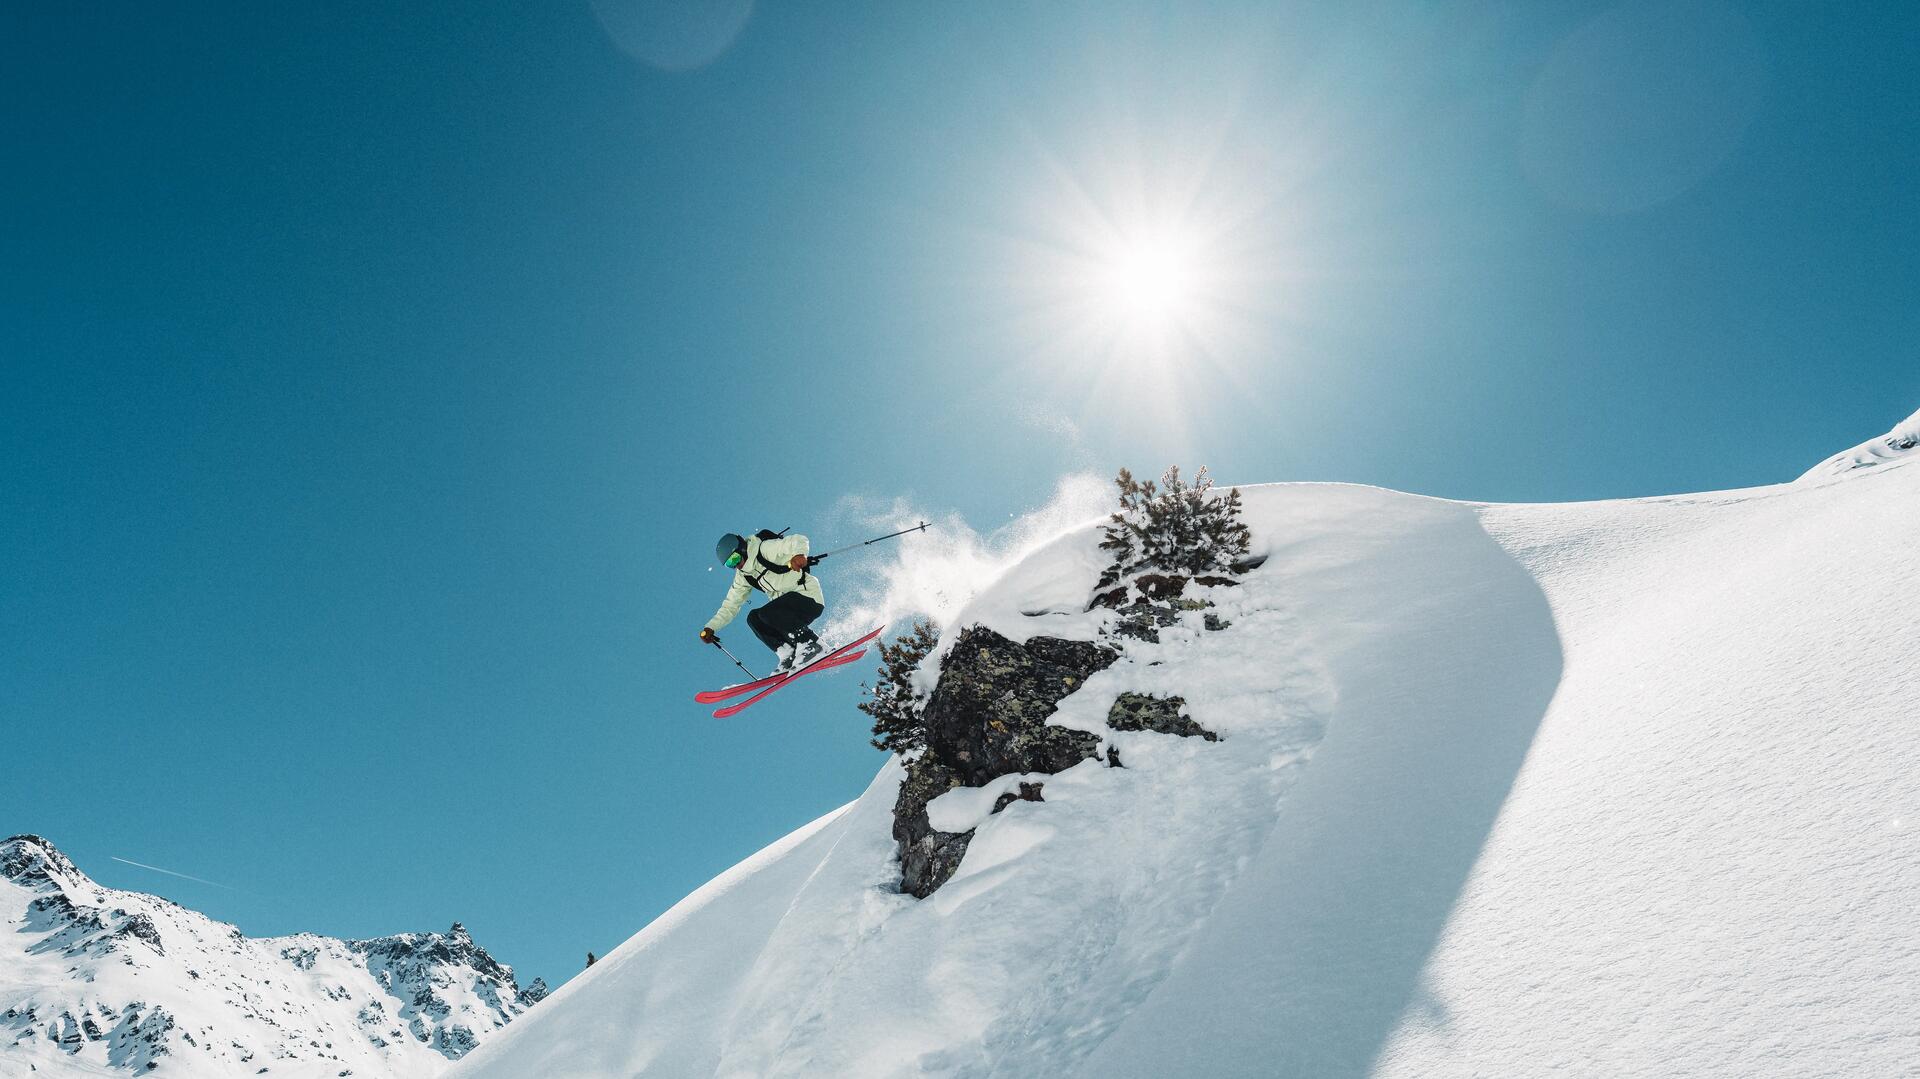 Discover freeride skiing